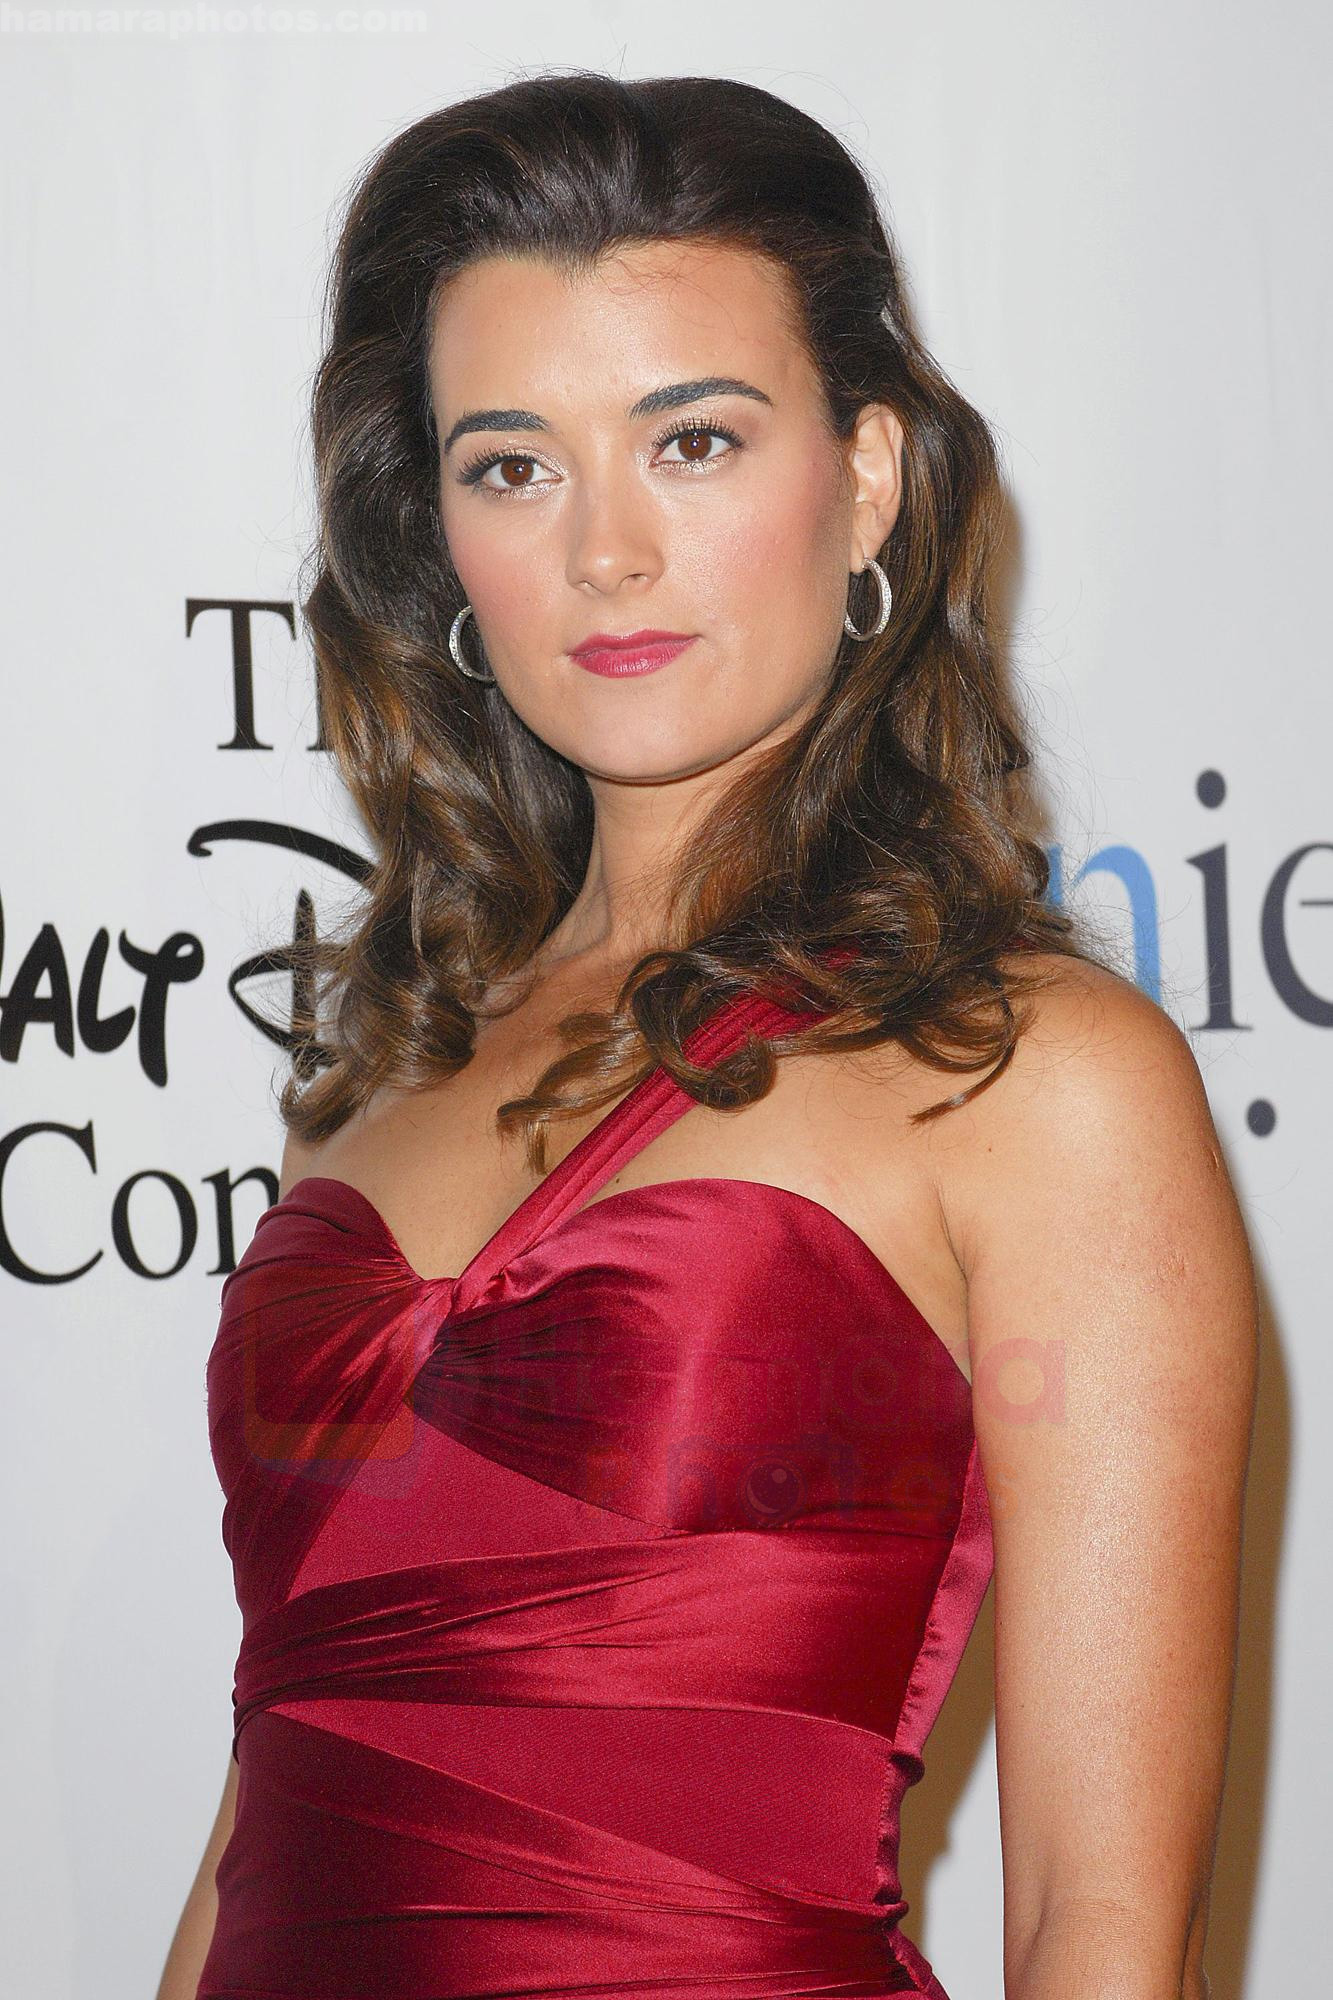 Cote de Pablo at the 24th Annual Imagen Awards held at the Beverly Hilton Hotel Los Angeles, California on 21.08.09 - IANS-WENN